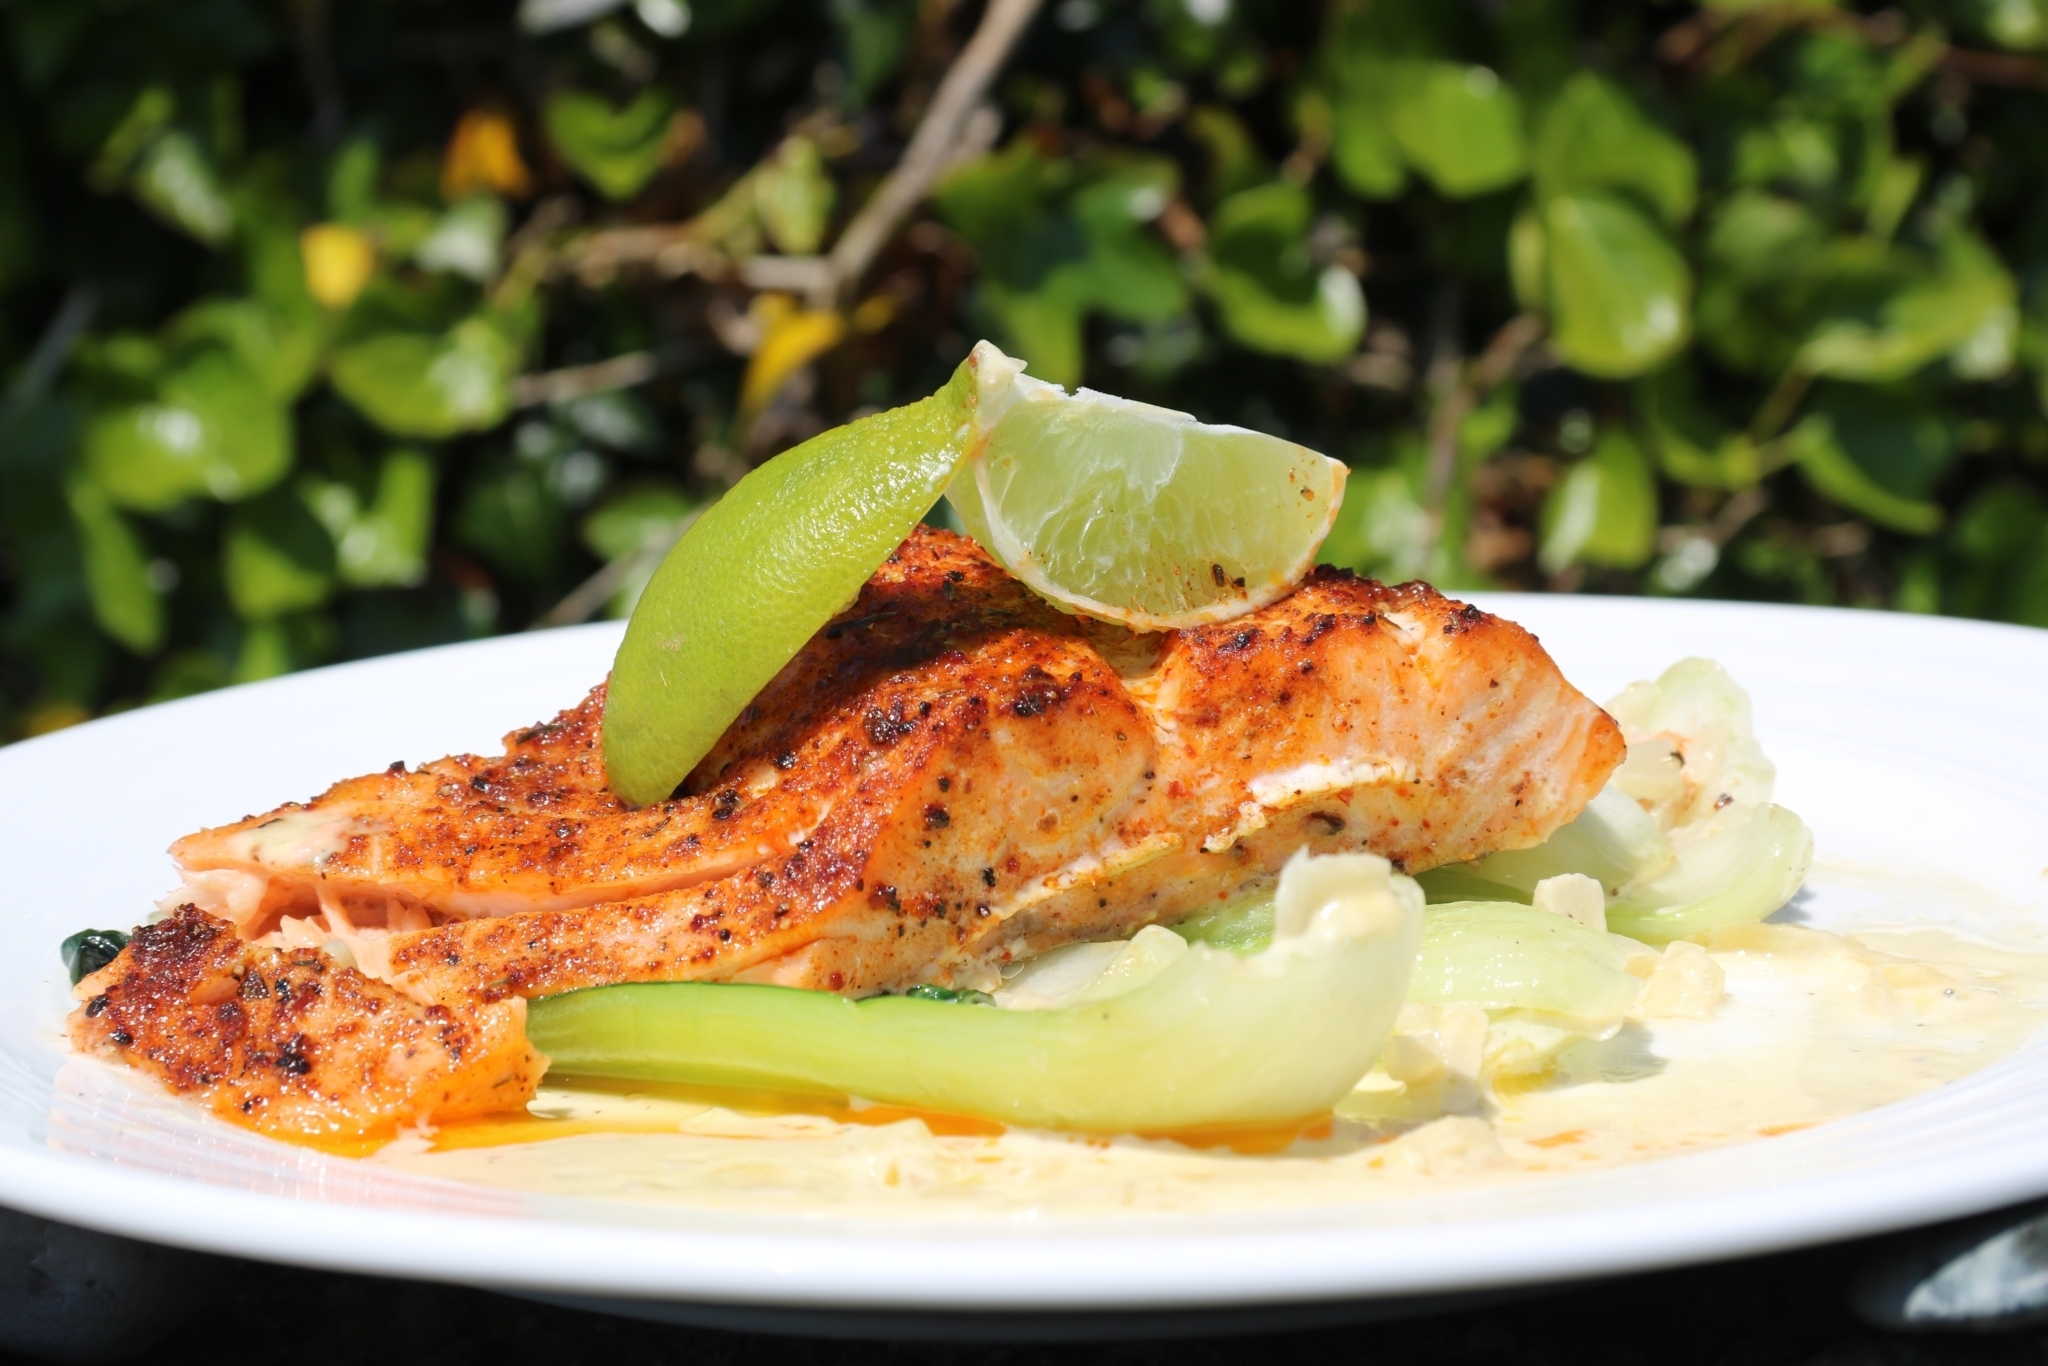 Cajun Salmon with Pak Choi and a Lime Cream Sauce by Siobhán Devereux Doyle